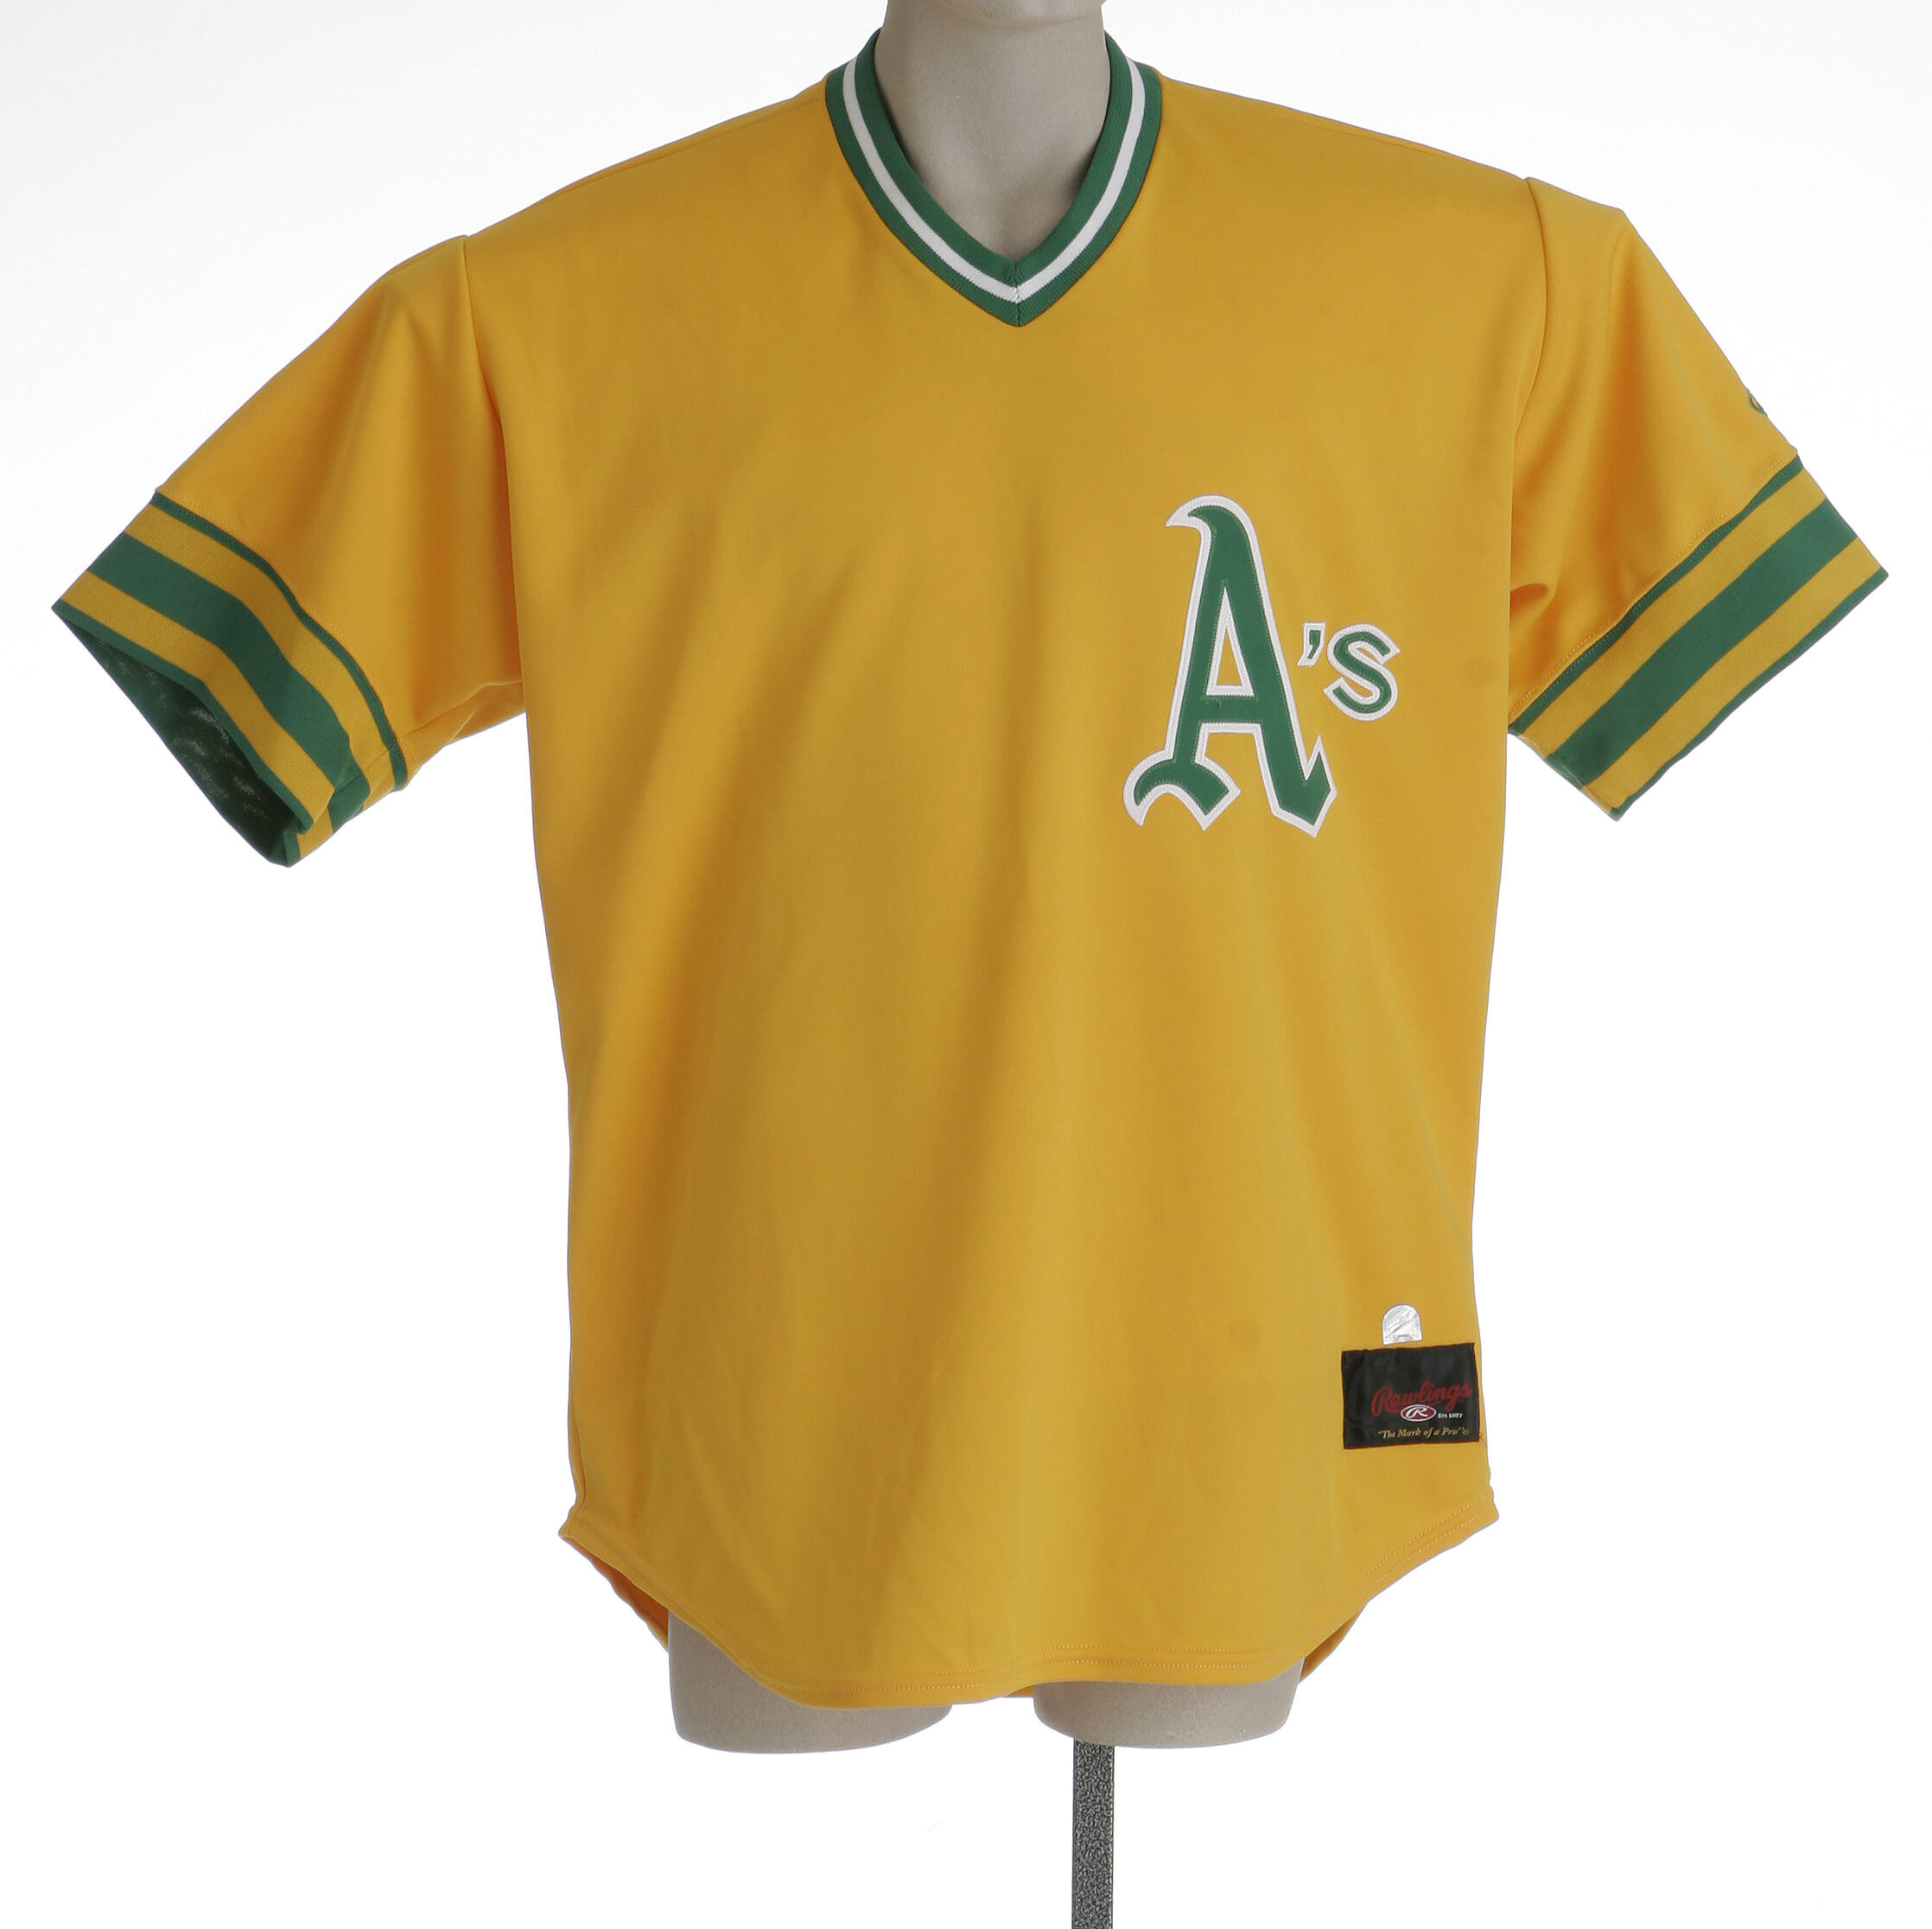 MLB 1980's Oakland A's #15 Majestic Game Used / Worn Batting Practice Baseball  Jersey